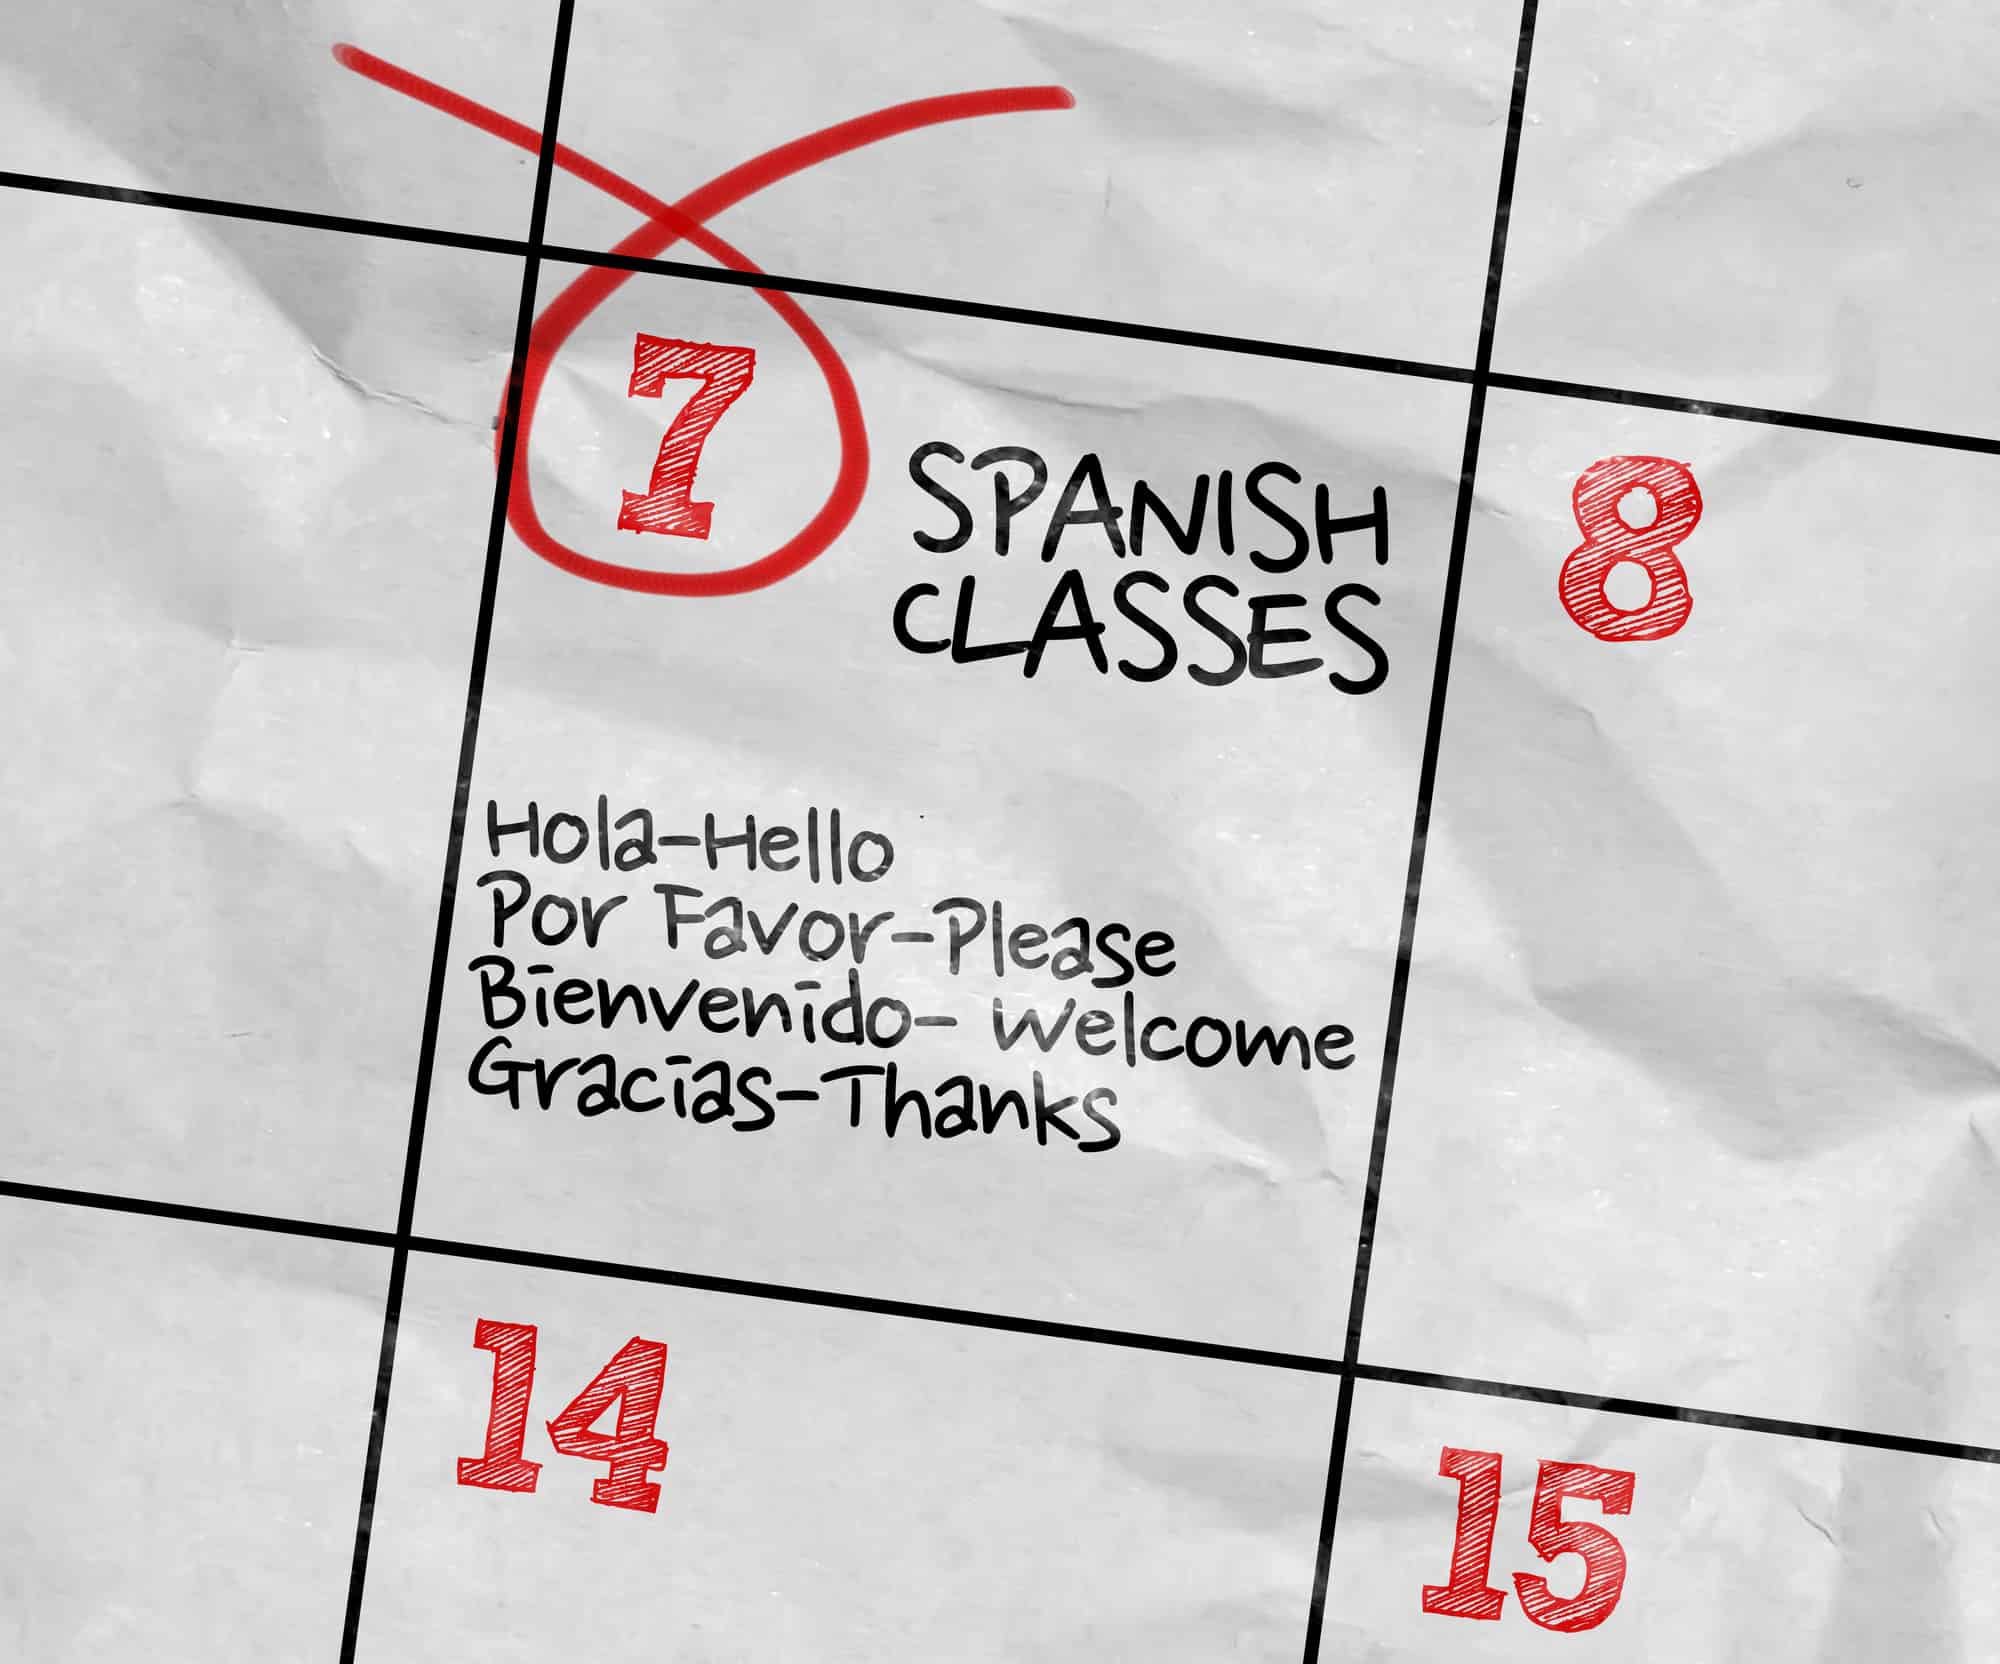 Image of the calendar with the text